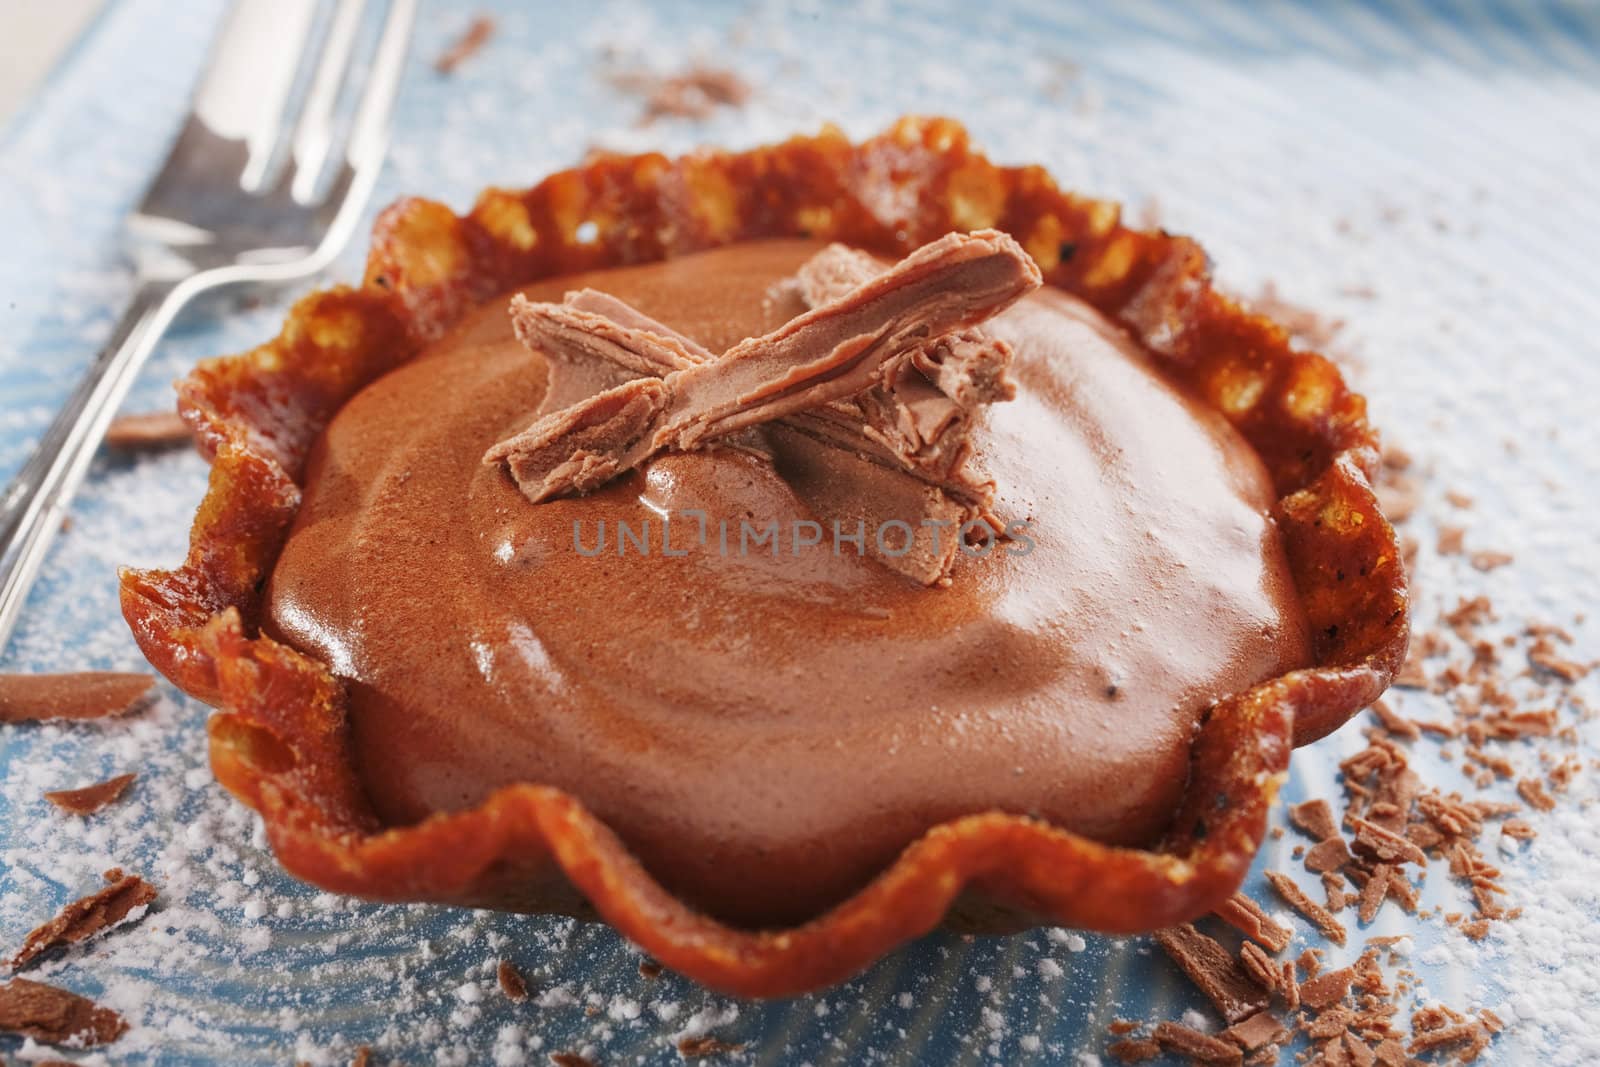 Brandy Snap Basket Filled with Chocolate by Travelling-light